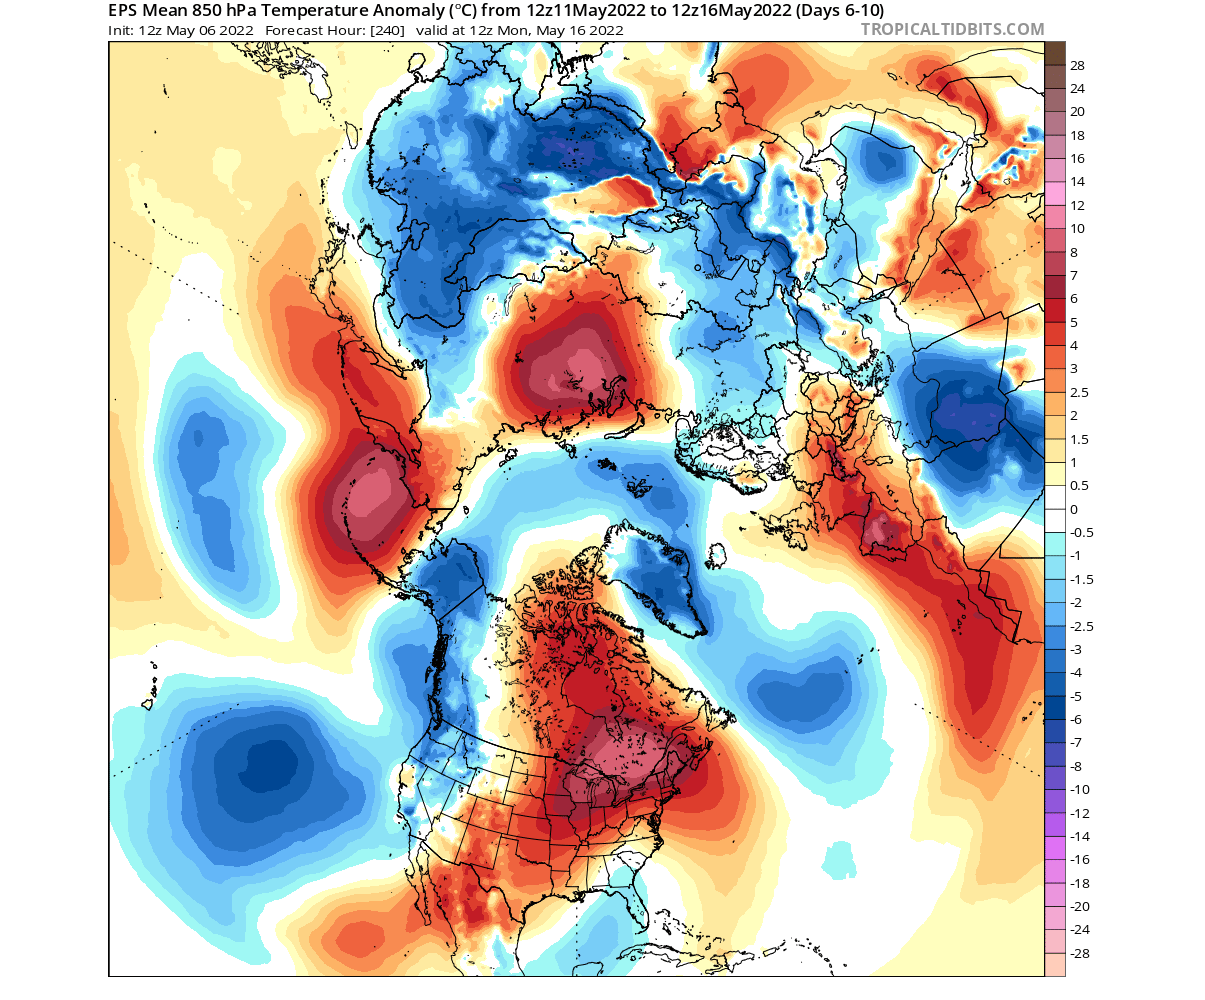 weather-forecast-update-spring-may-early month-weather-north-hemisphere-temperature-pattern-ecmwf